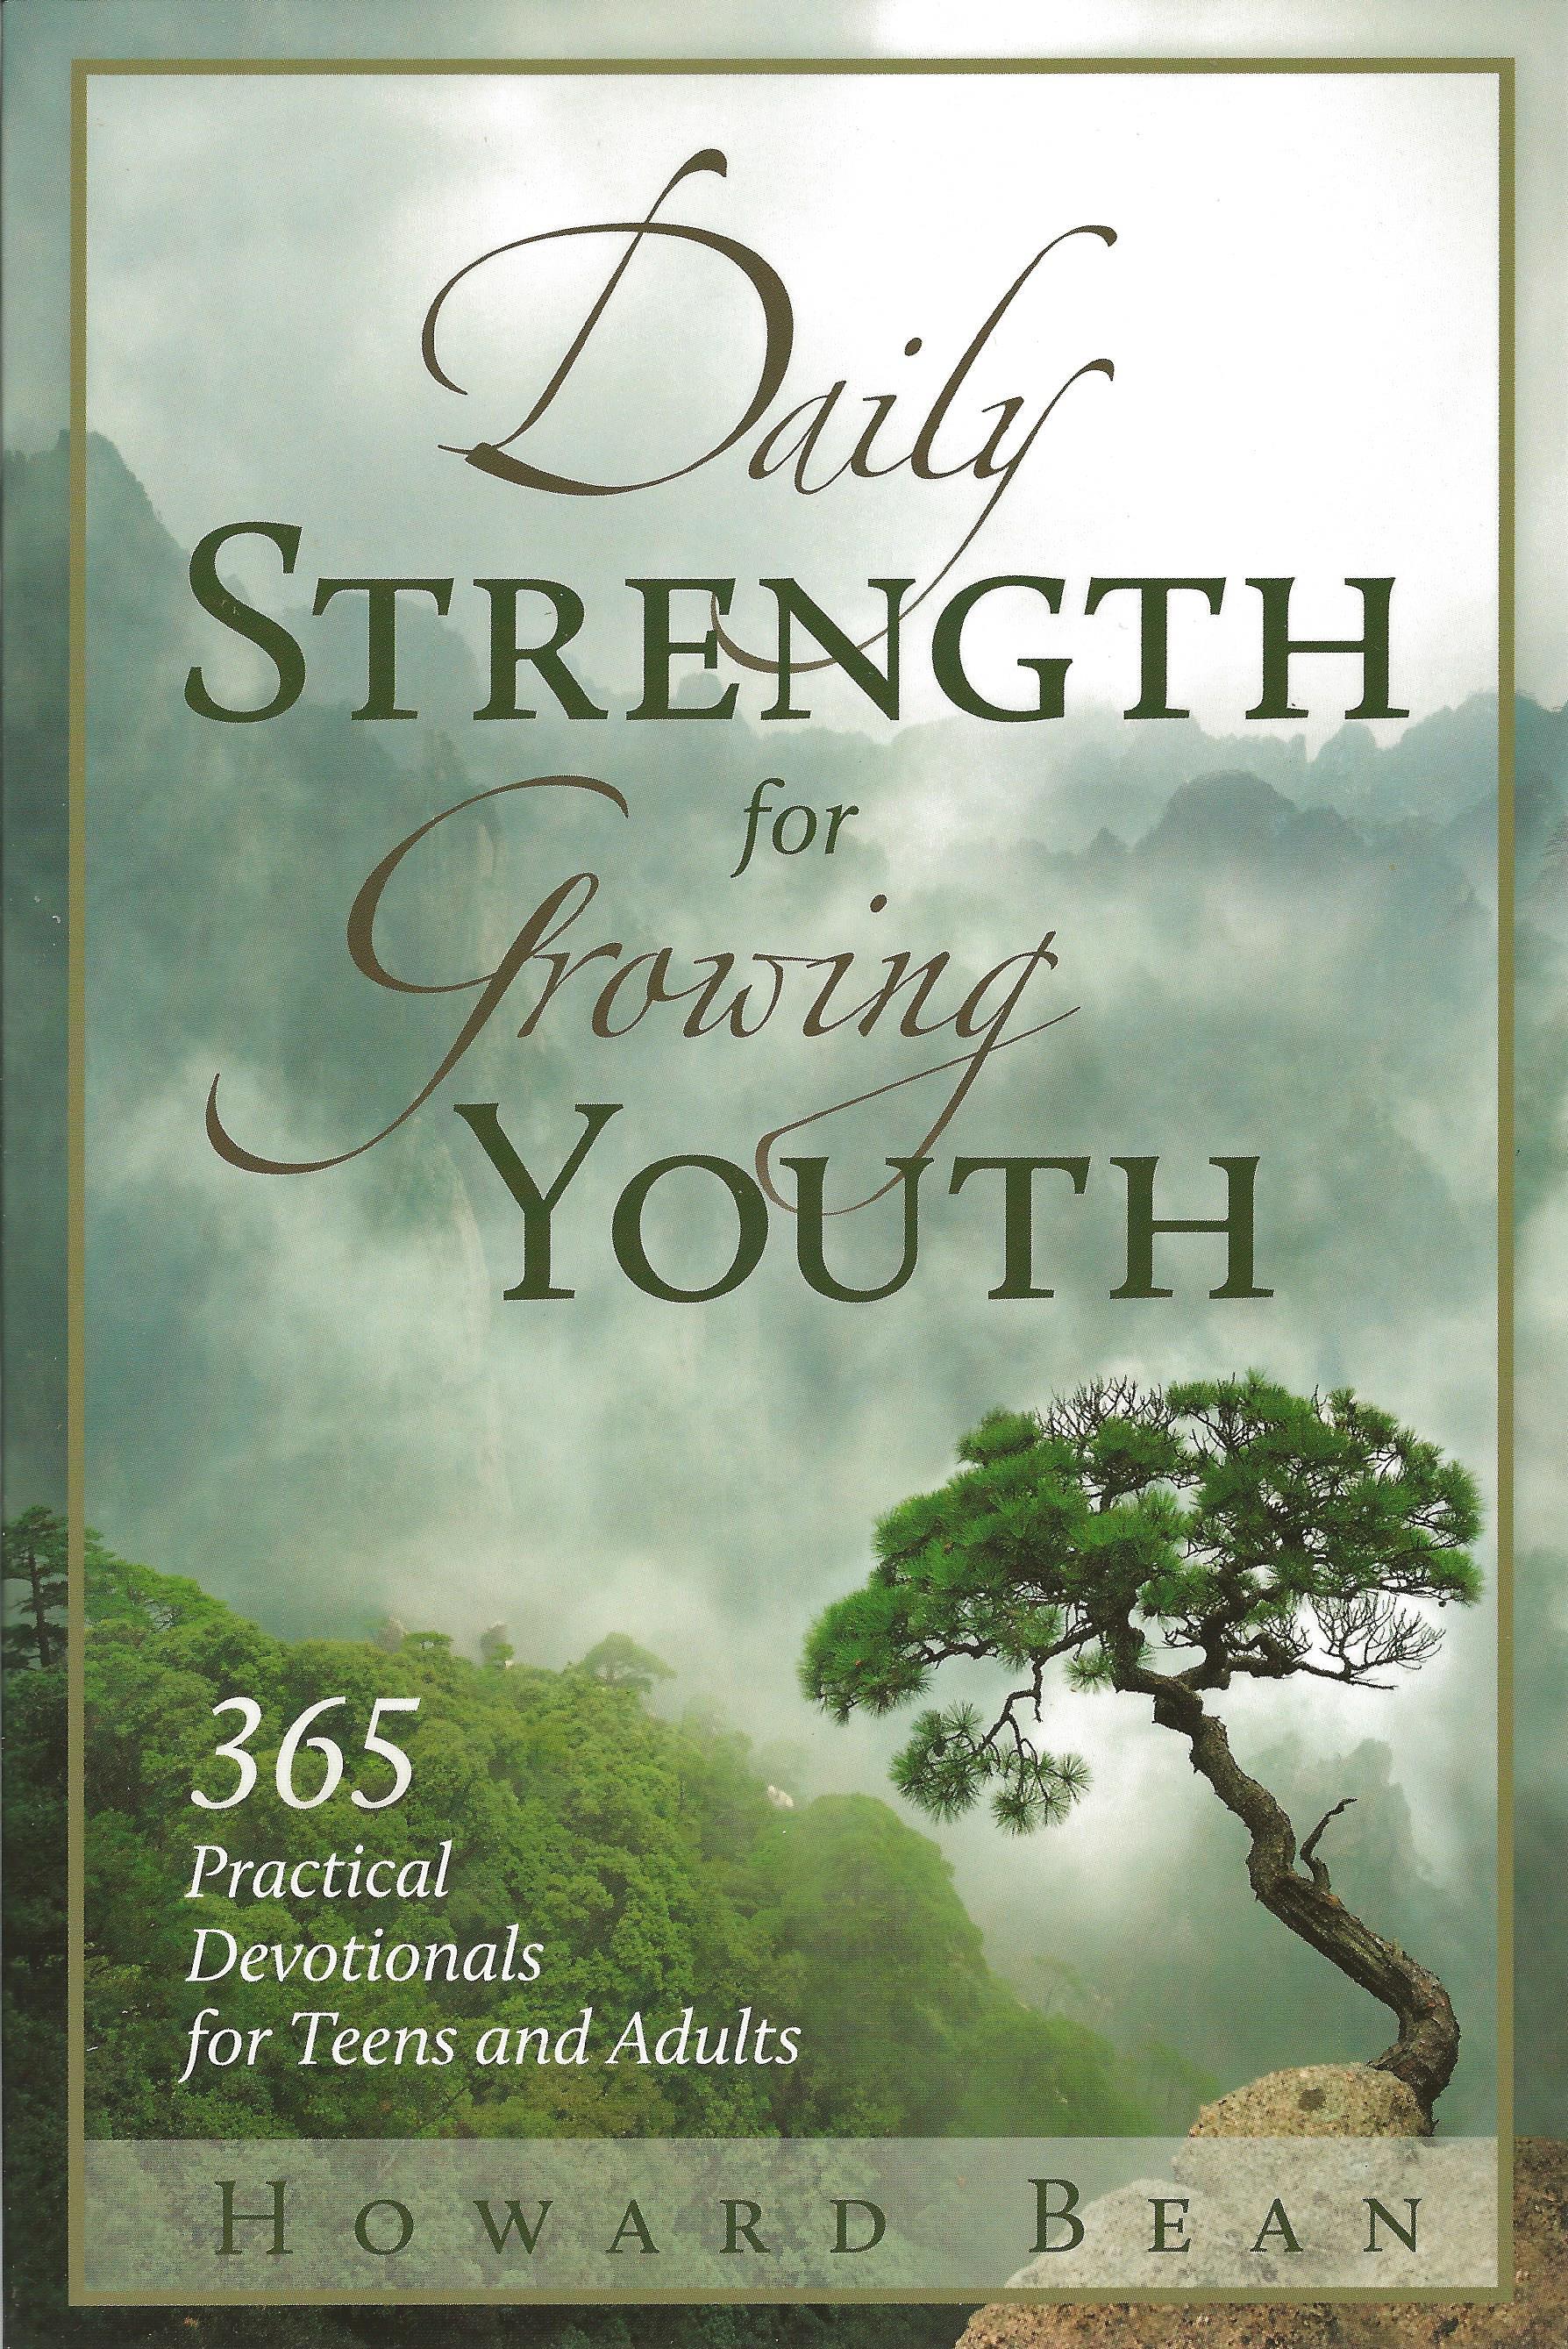 DAILY STRENGTH FOR GROWING YOUTH Howard Bean